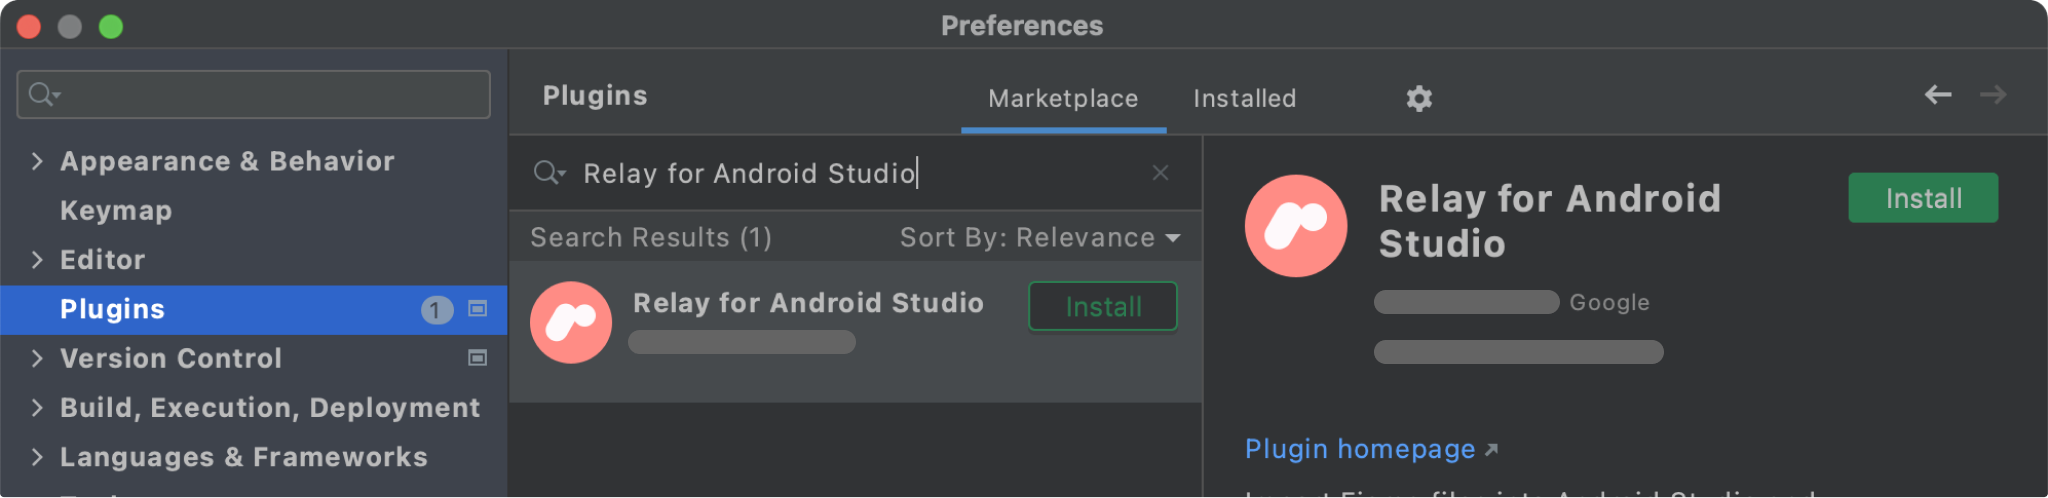 Relay for Android Studio di marketplace